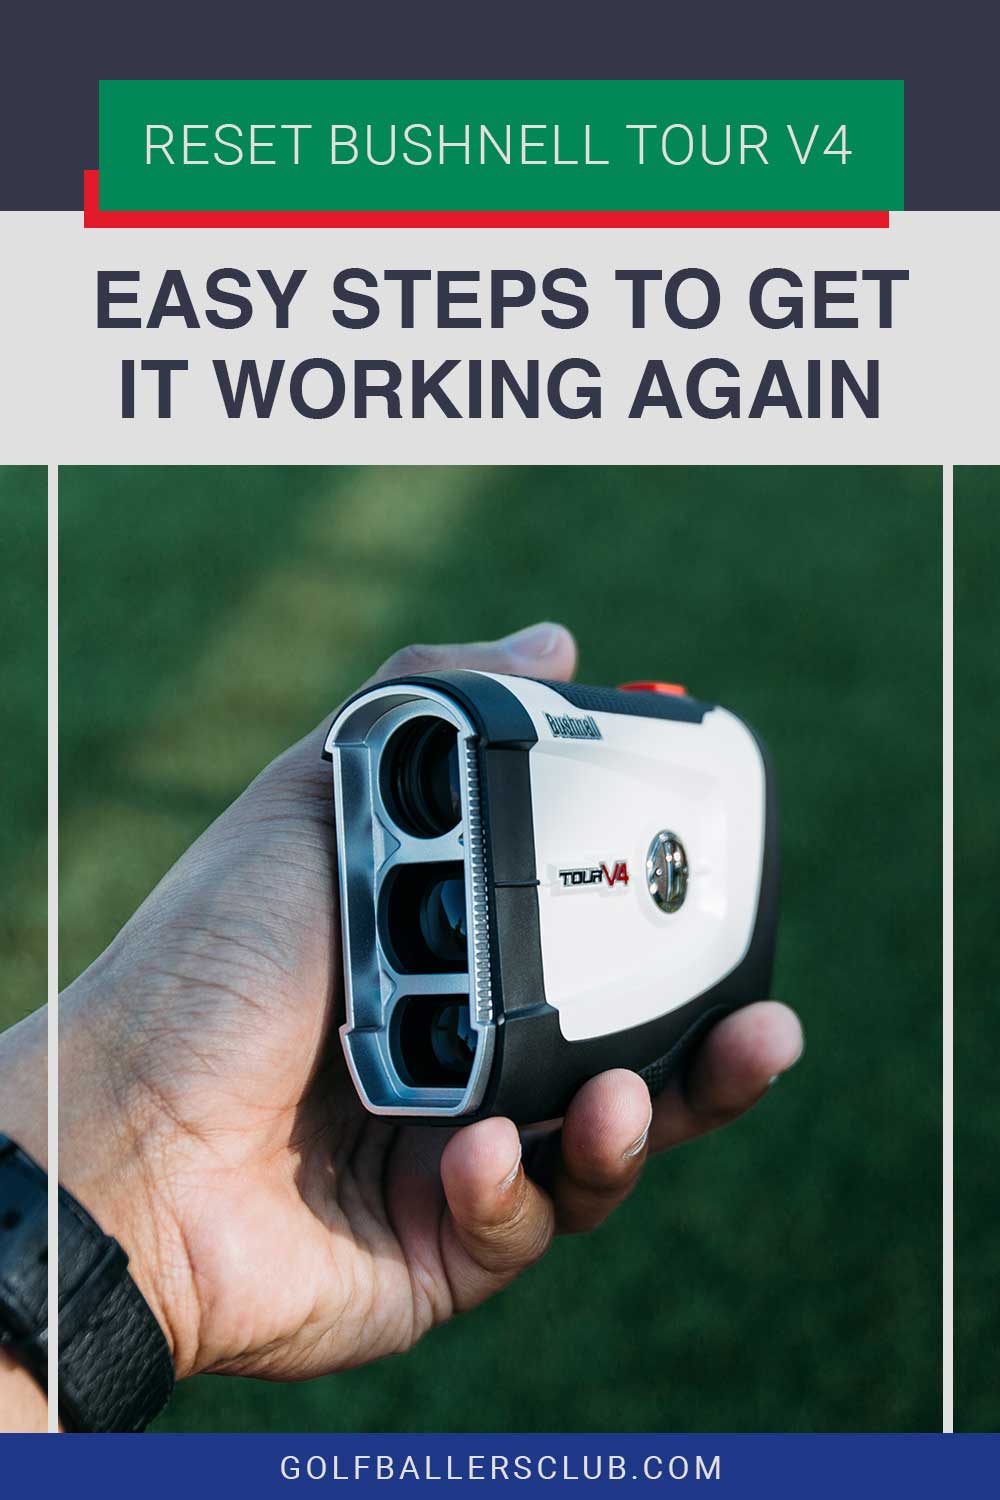 Bushnell Tour V4 in a Man's hand - resetting it and Easy Steps to Get it Working Again